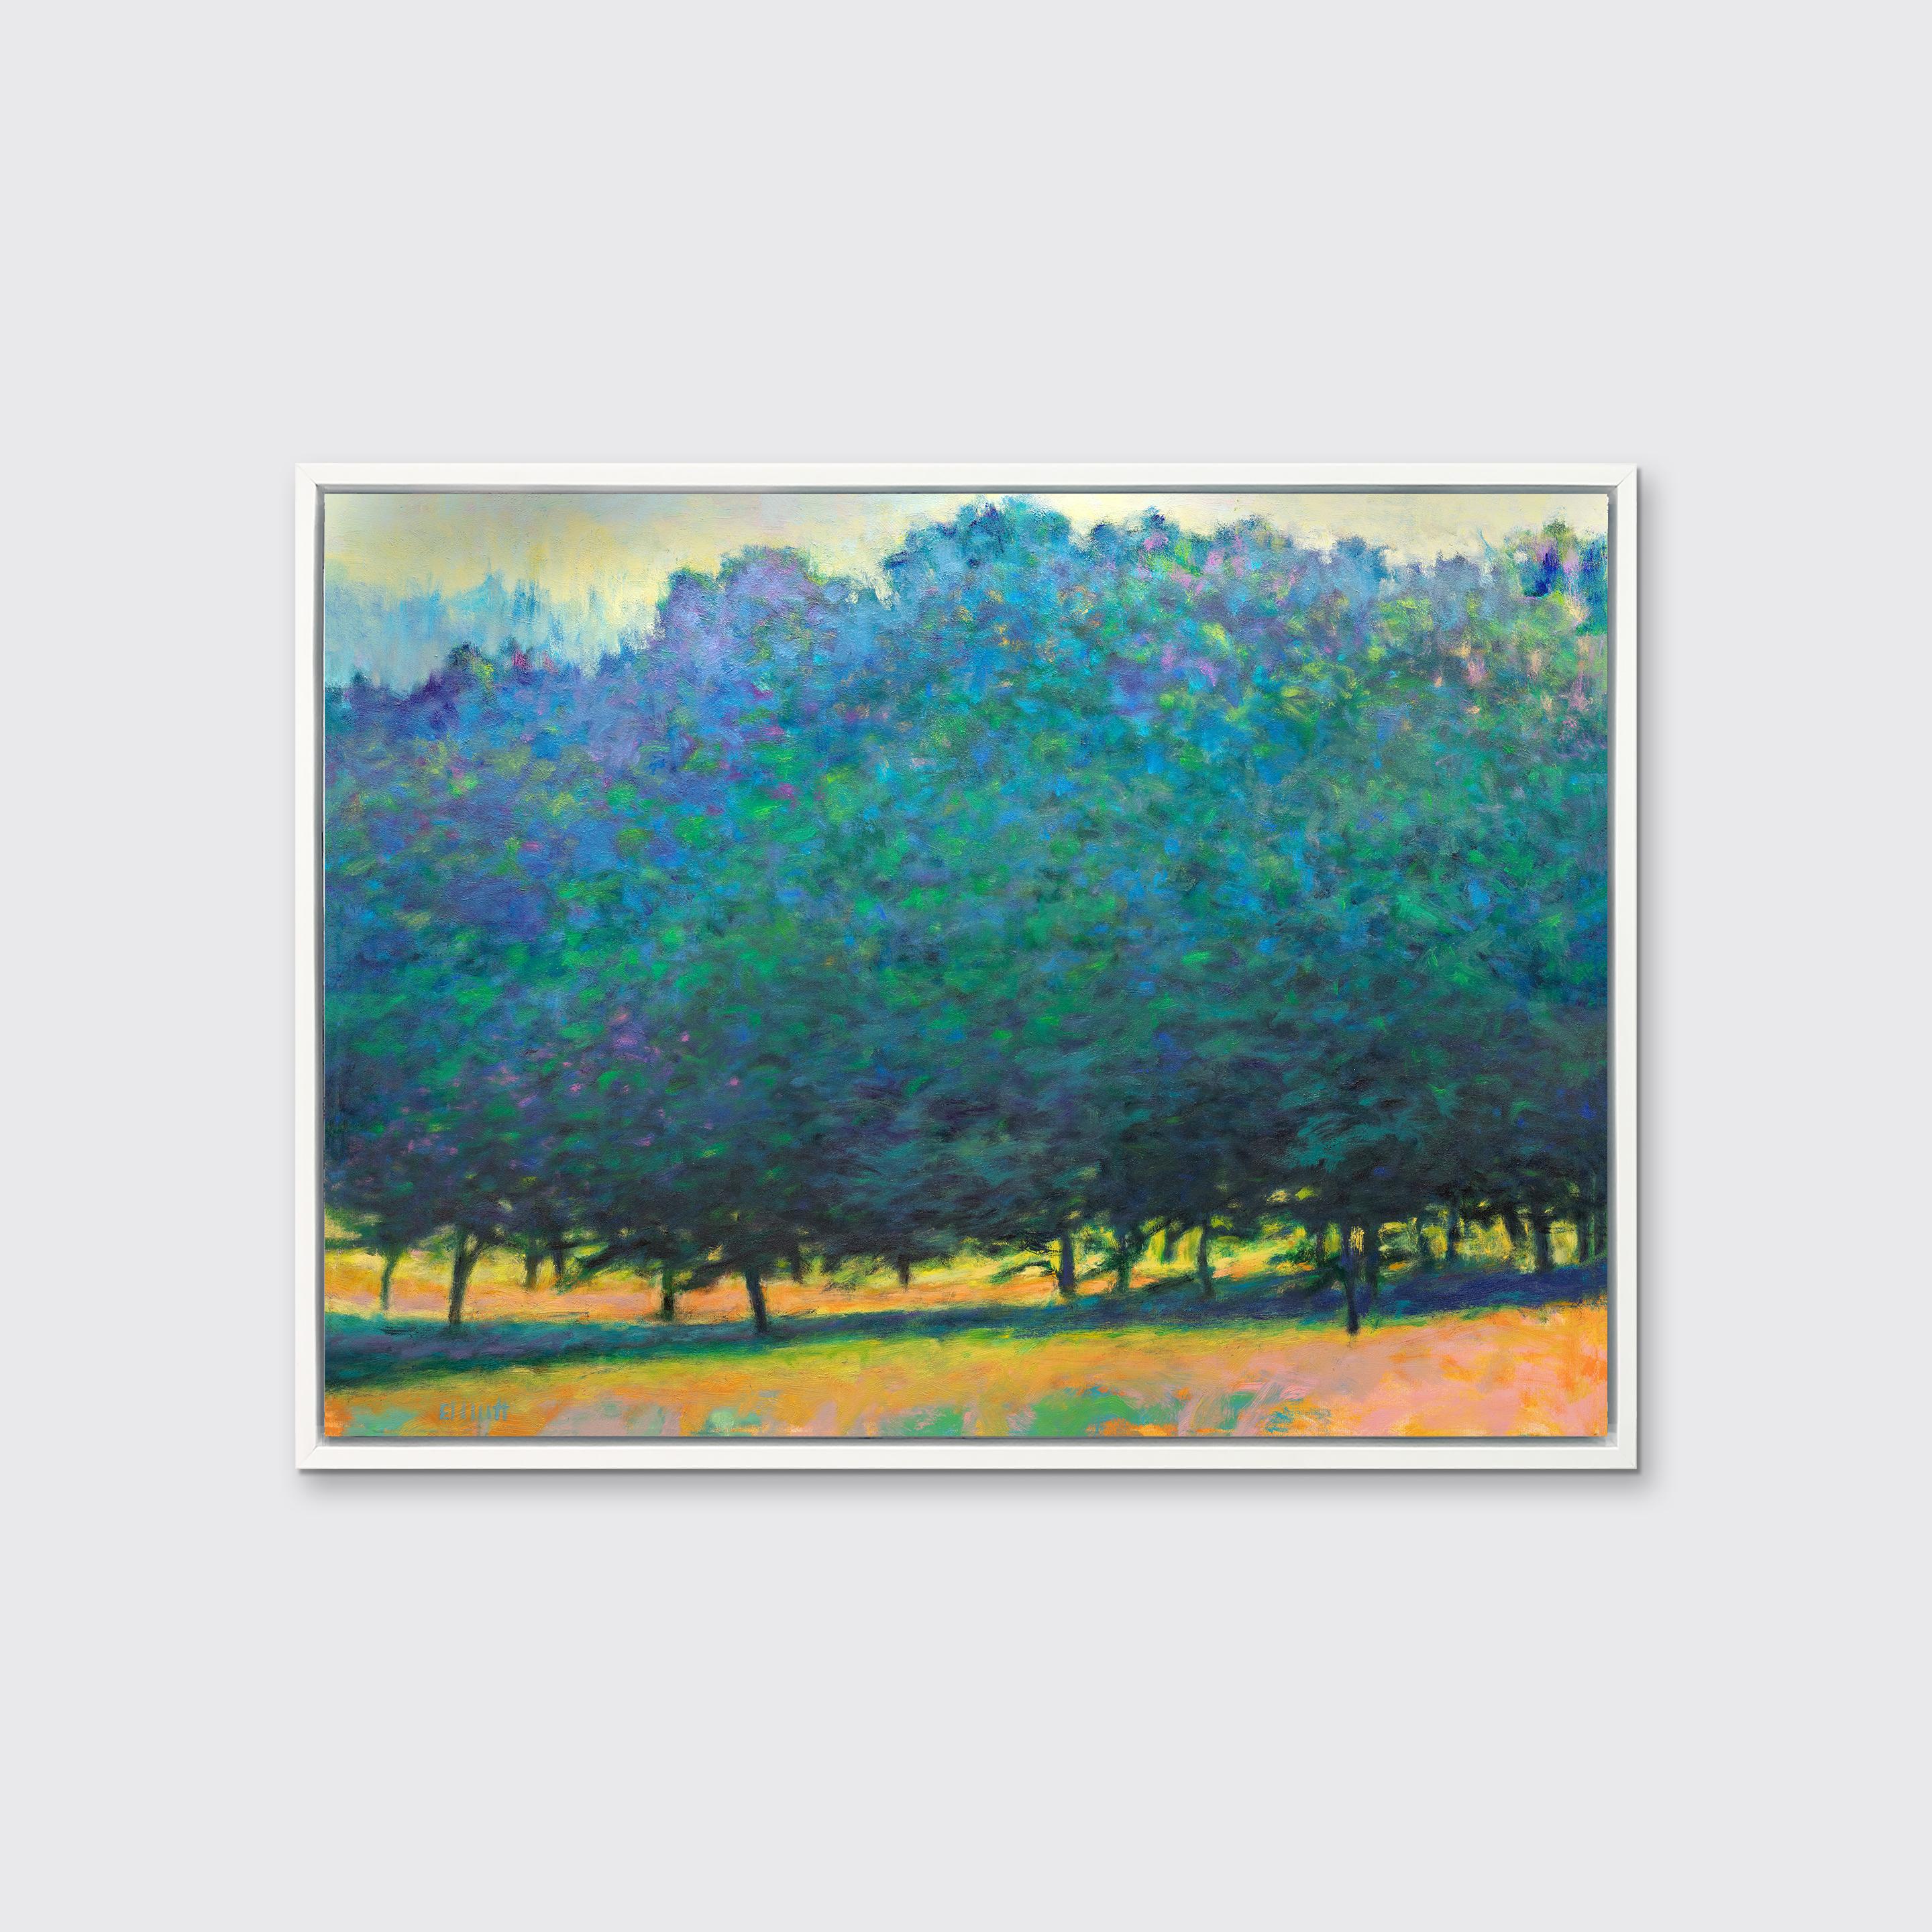 This contemporary abstract landscape limited edition print by Ken Elliott features tall, lush trees, the leaves of which are cool blue and violet tones. Small portions of the bottoms of the trunks are just visible beneath the dense forest leaves,